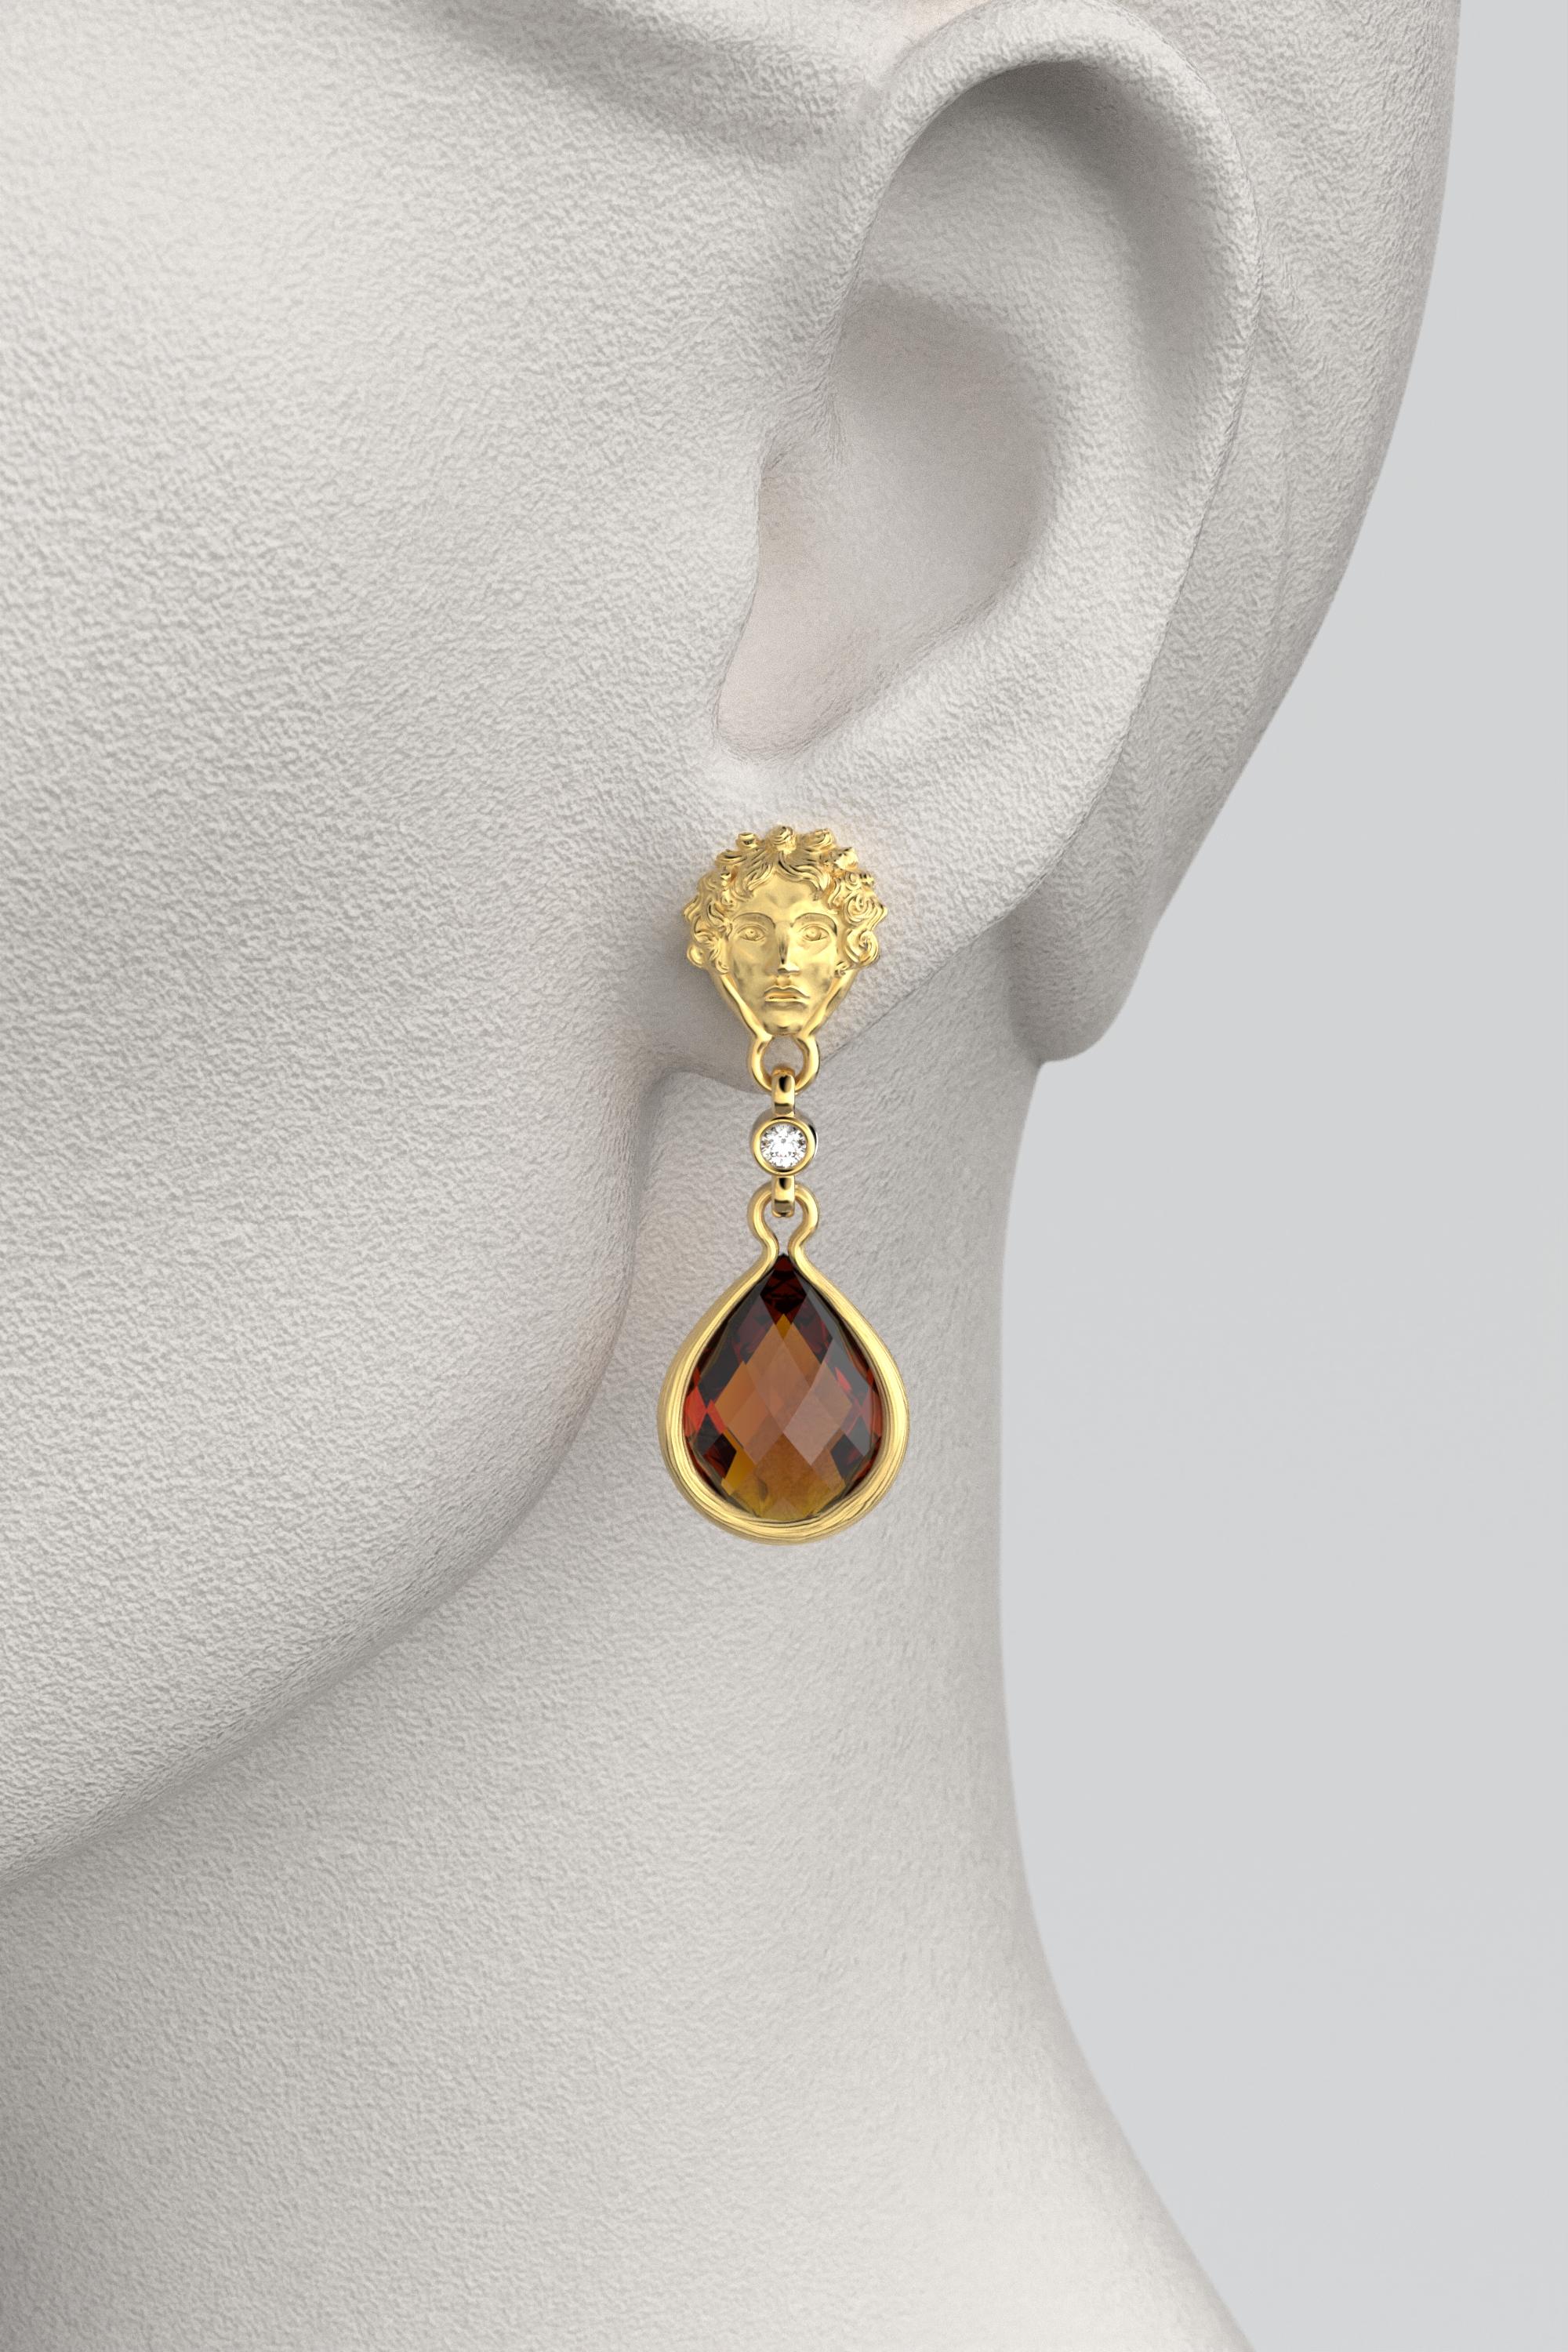 Women's Oltremare Gioielli 14k Gold Madeira Citrine and Diamond Dangle Drop Earrings  For Sale